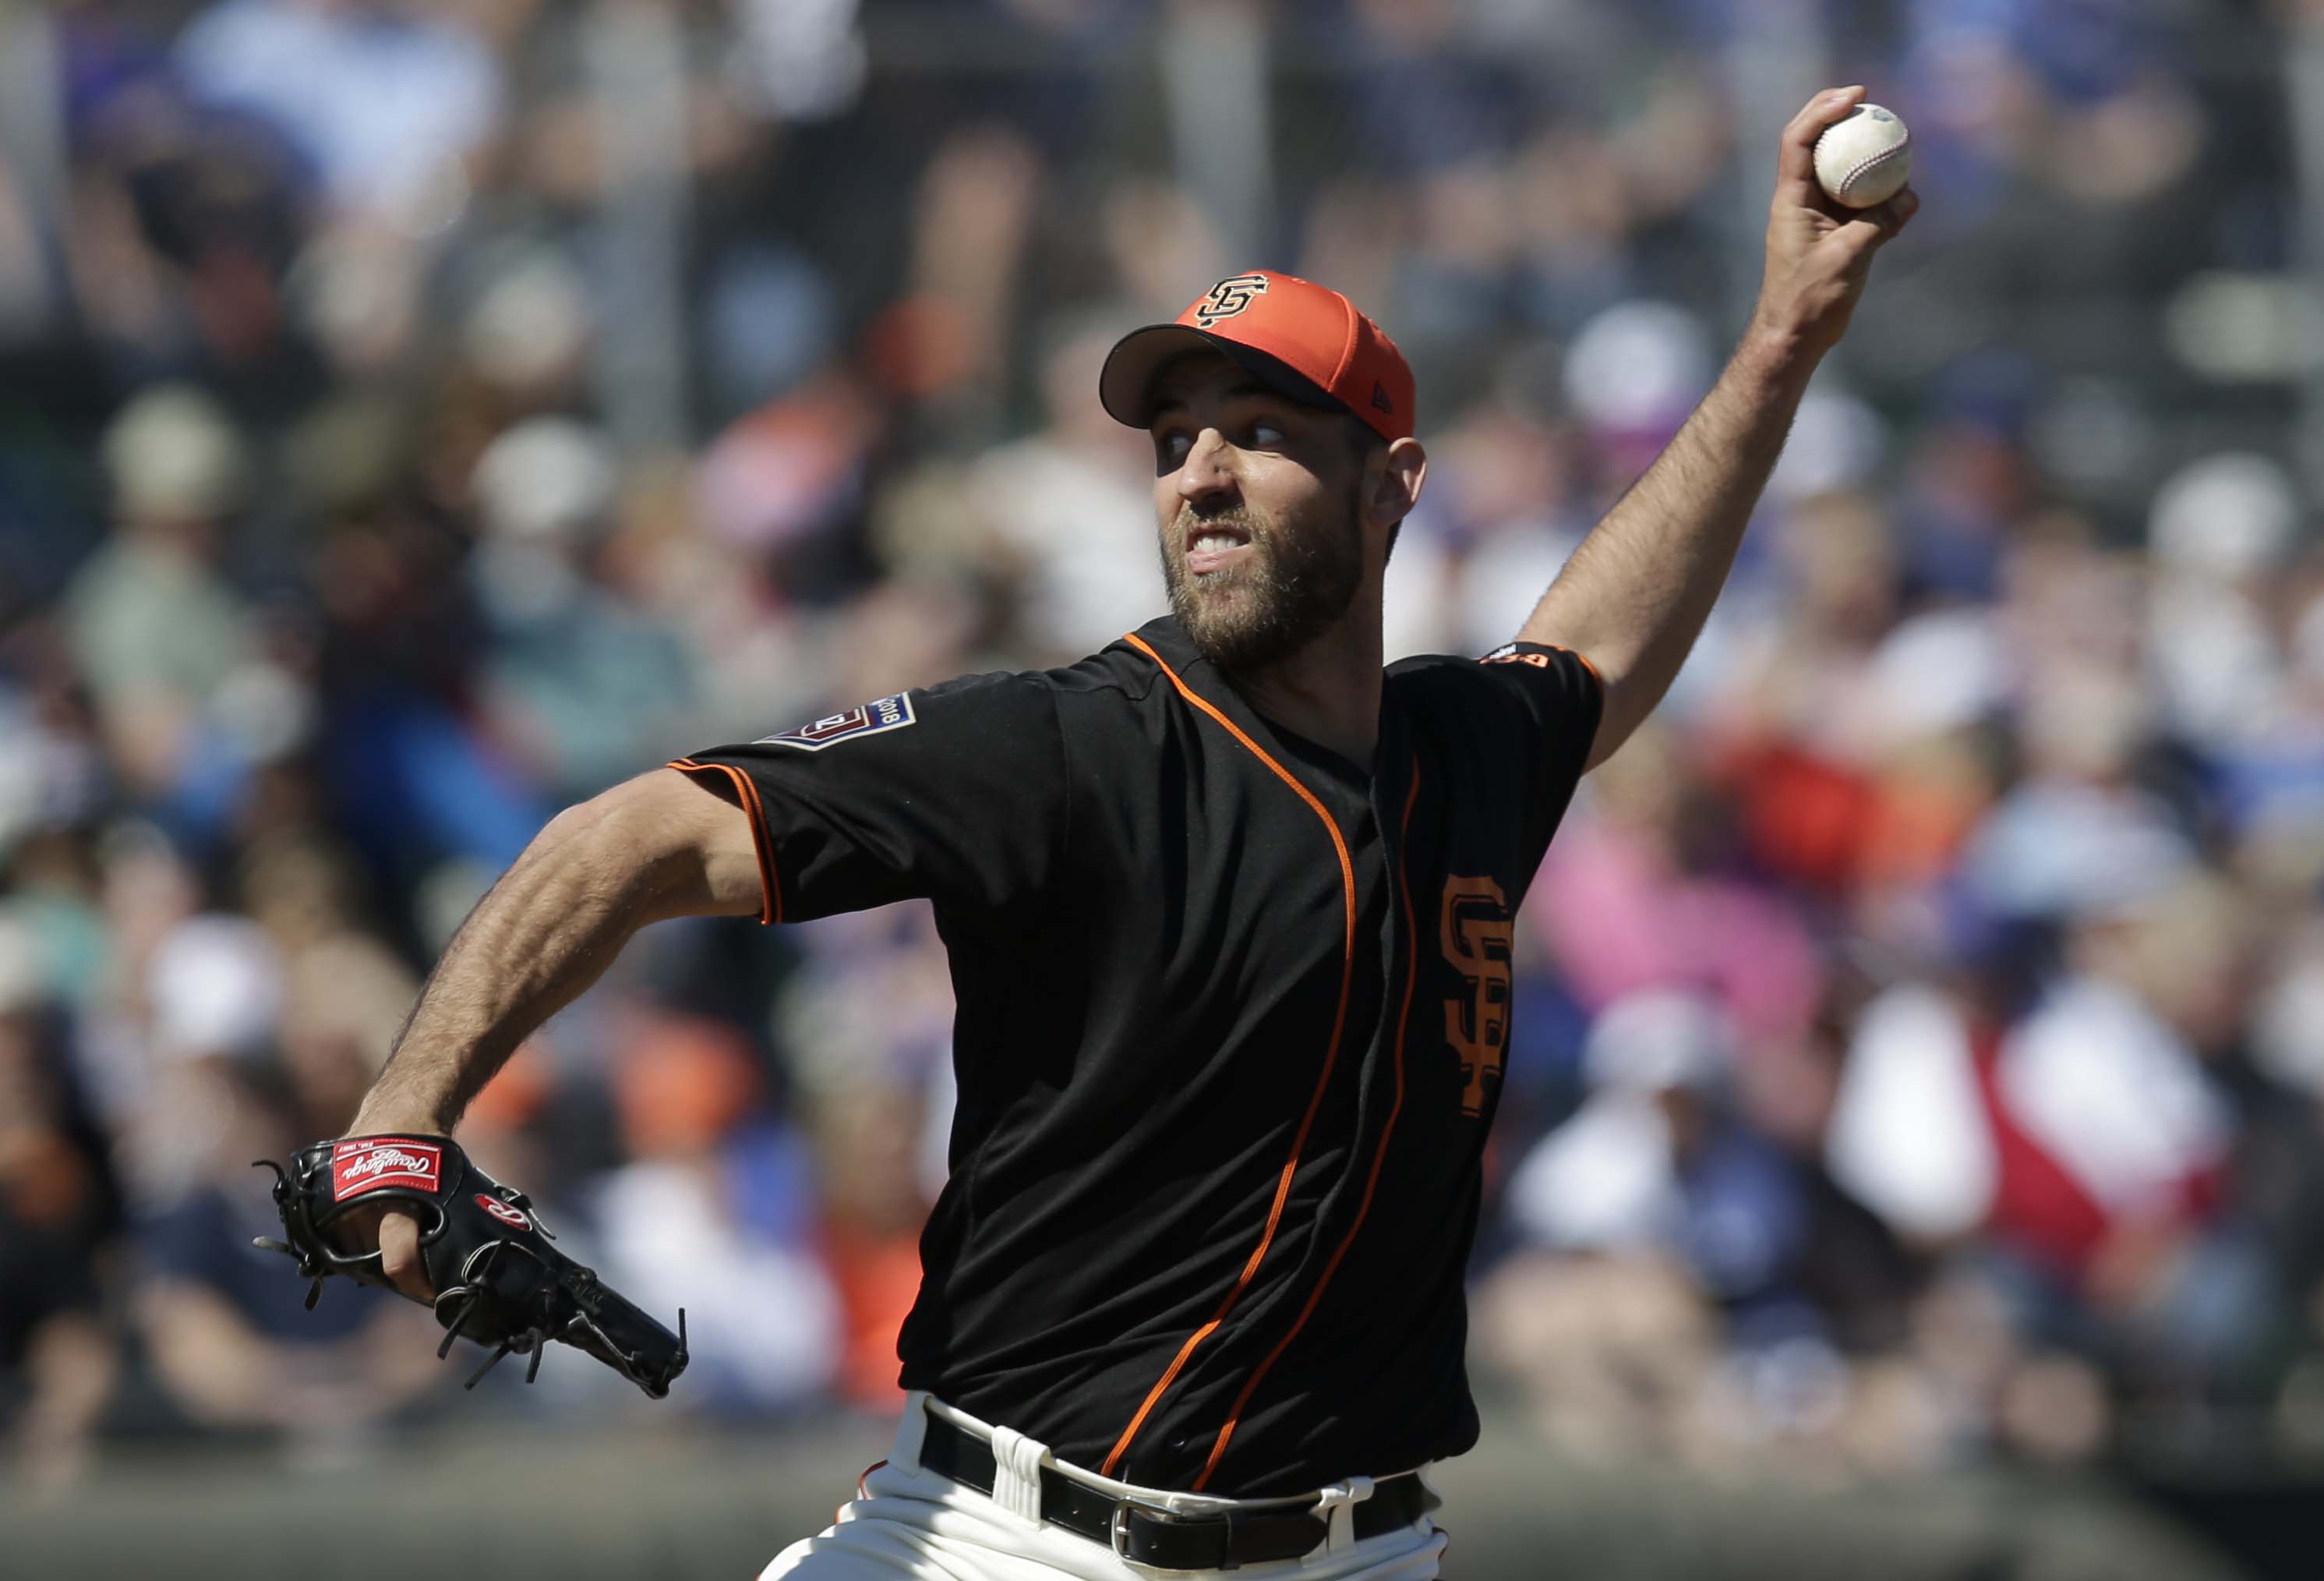 MLB: Spring Training-Chicago Cubs at San Francisco Giants